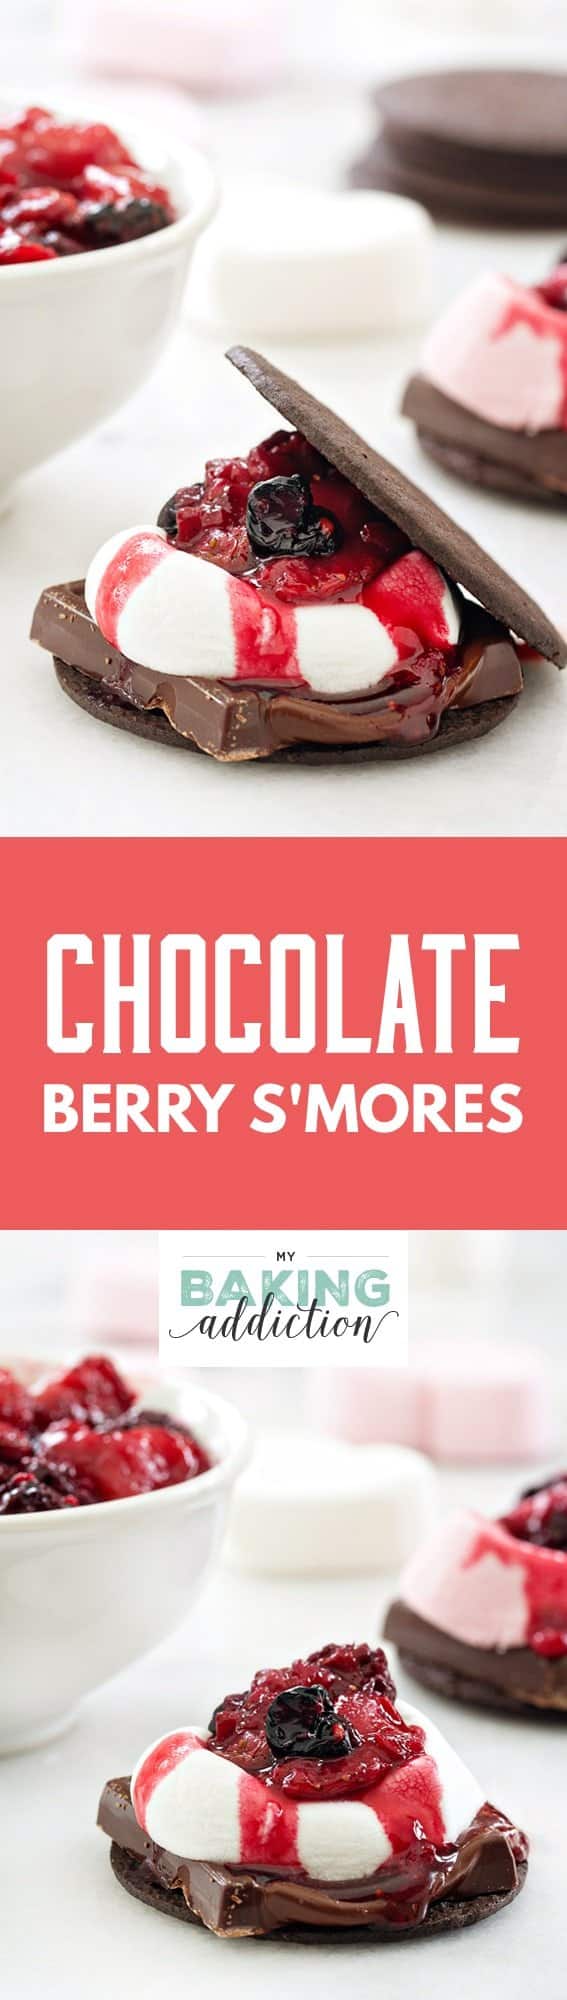 Chocolate Berry S'mores are so easy to make and they're crazy delicious. With just a few ingredients, you'll have an incredible dessert in no time! 